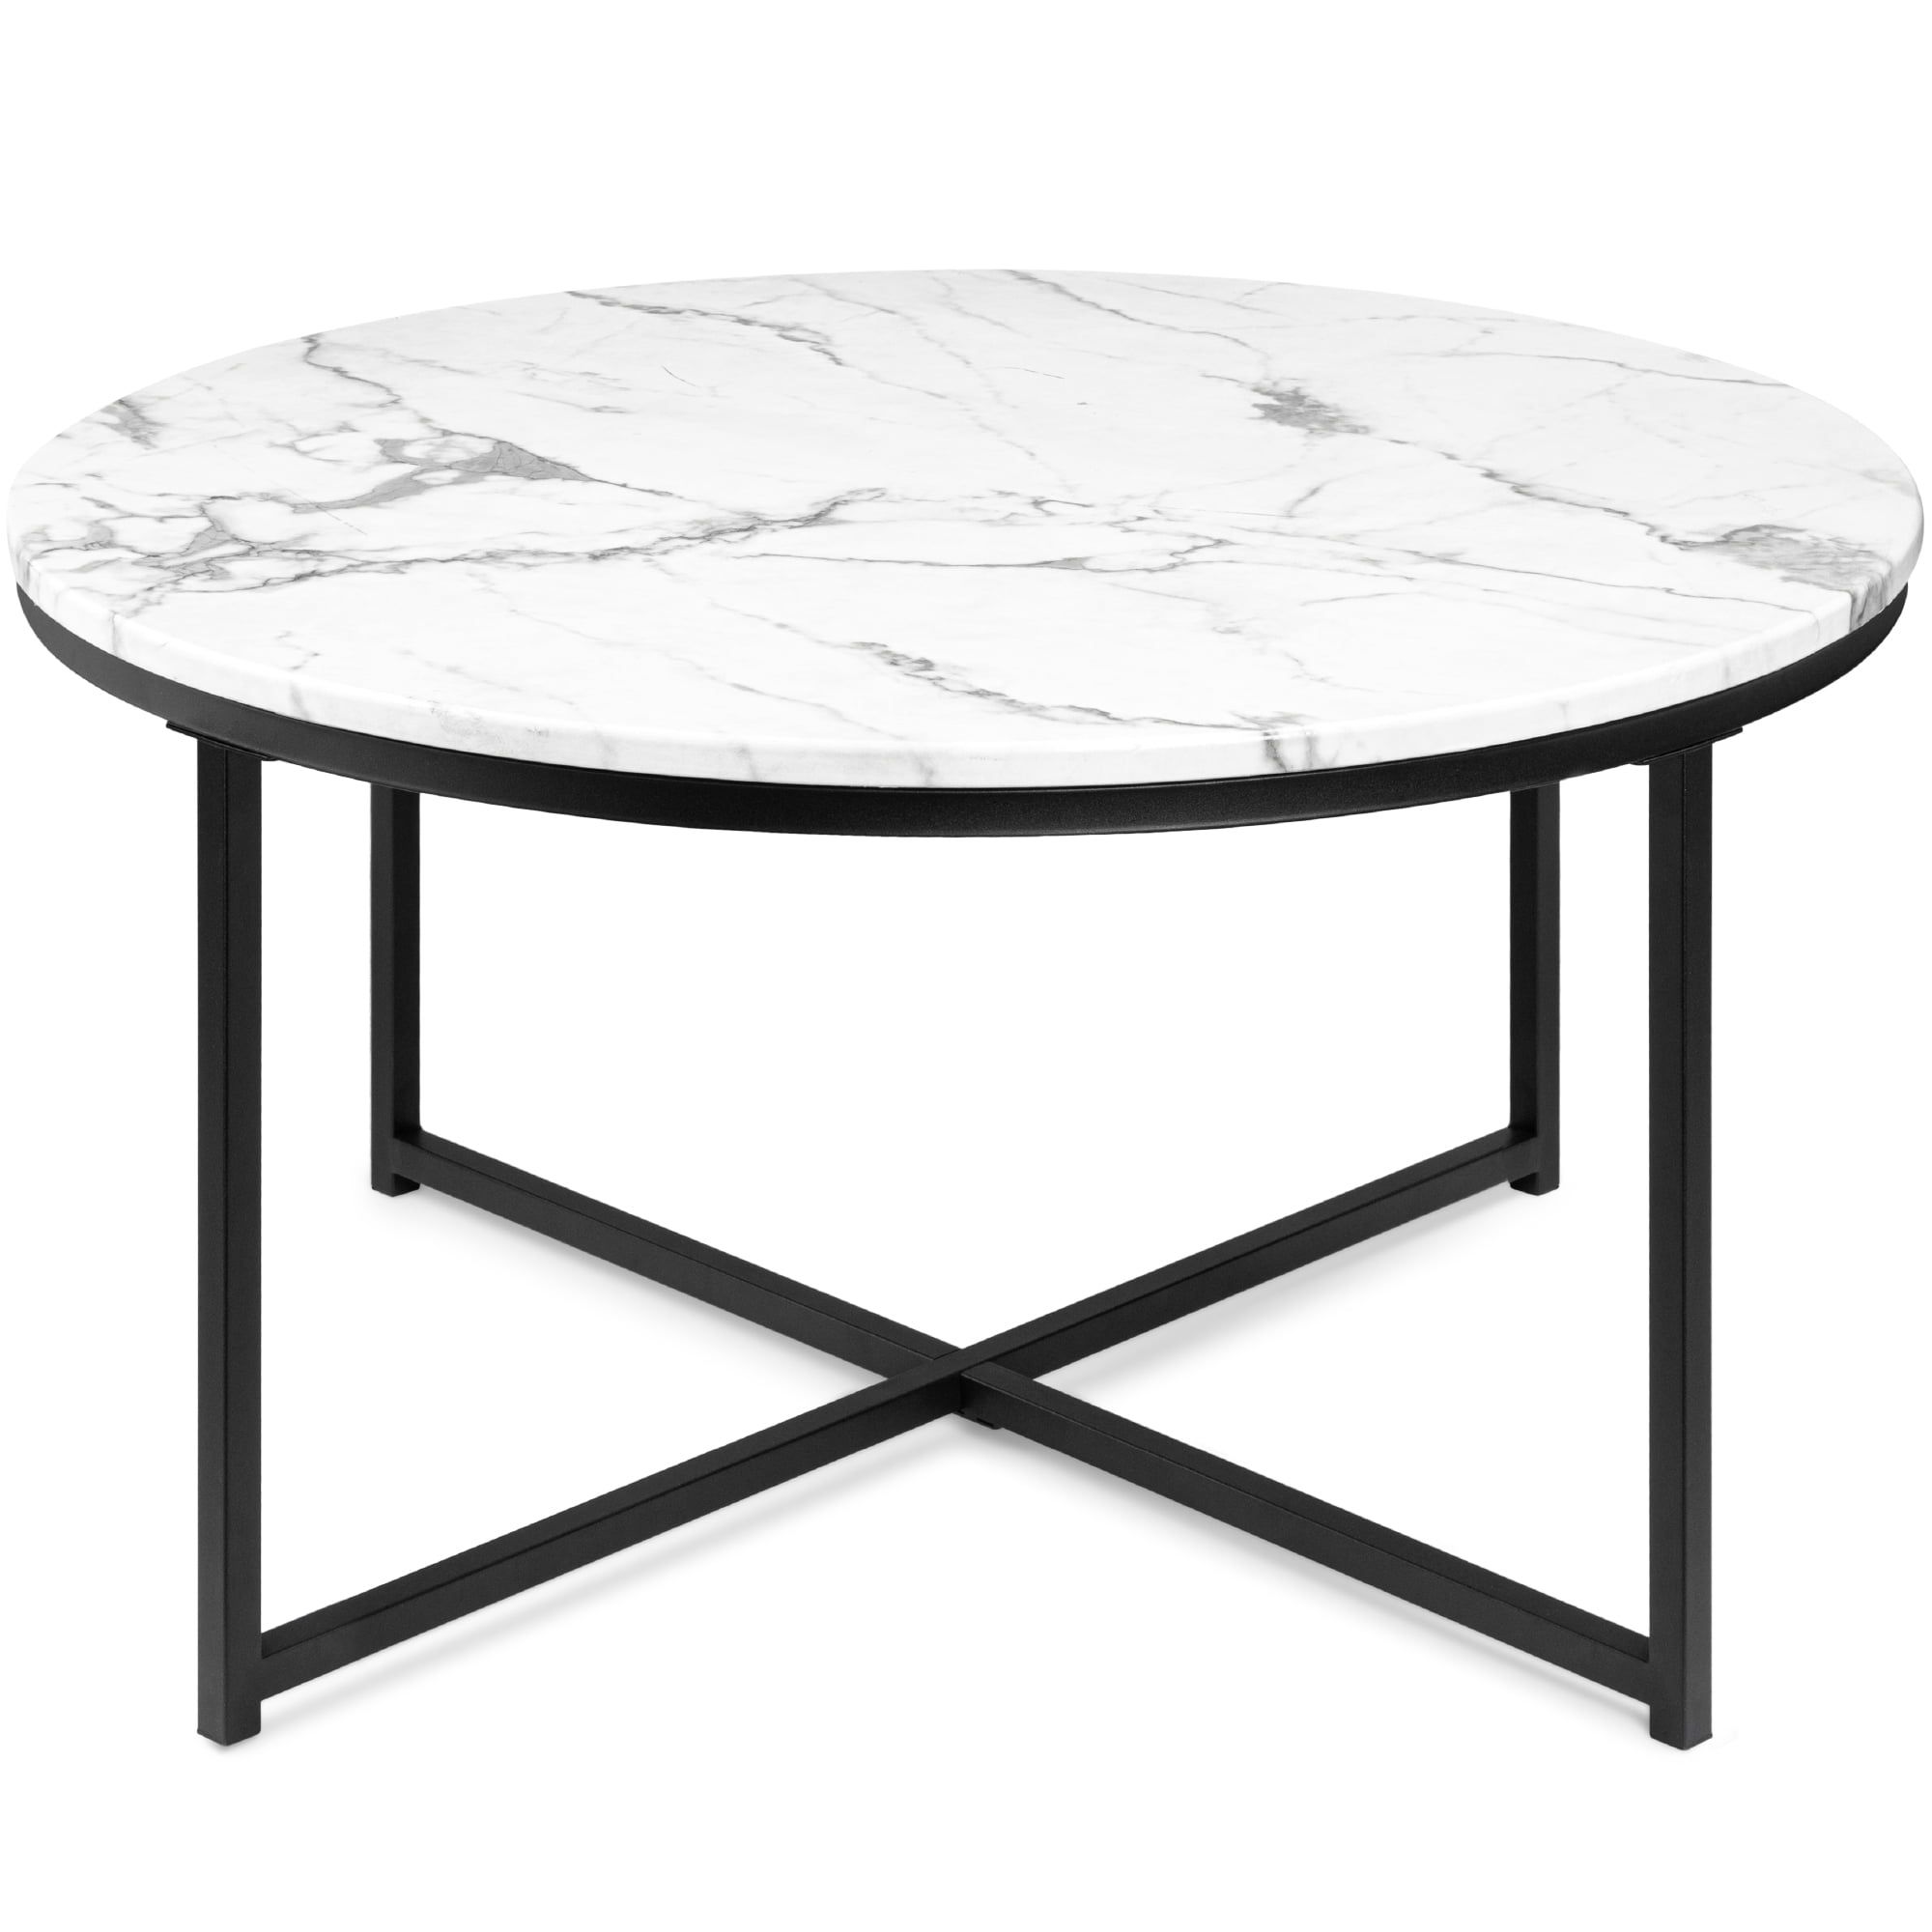 Best Choice Products 36in Faux Marble Modern Round Living Room Accent Intended For Modern Round Faux Marble Coffee Tables (View 2 of 20)